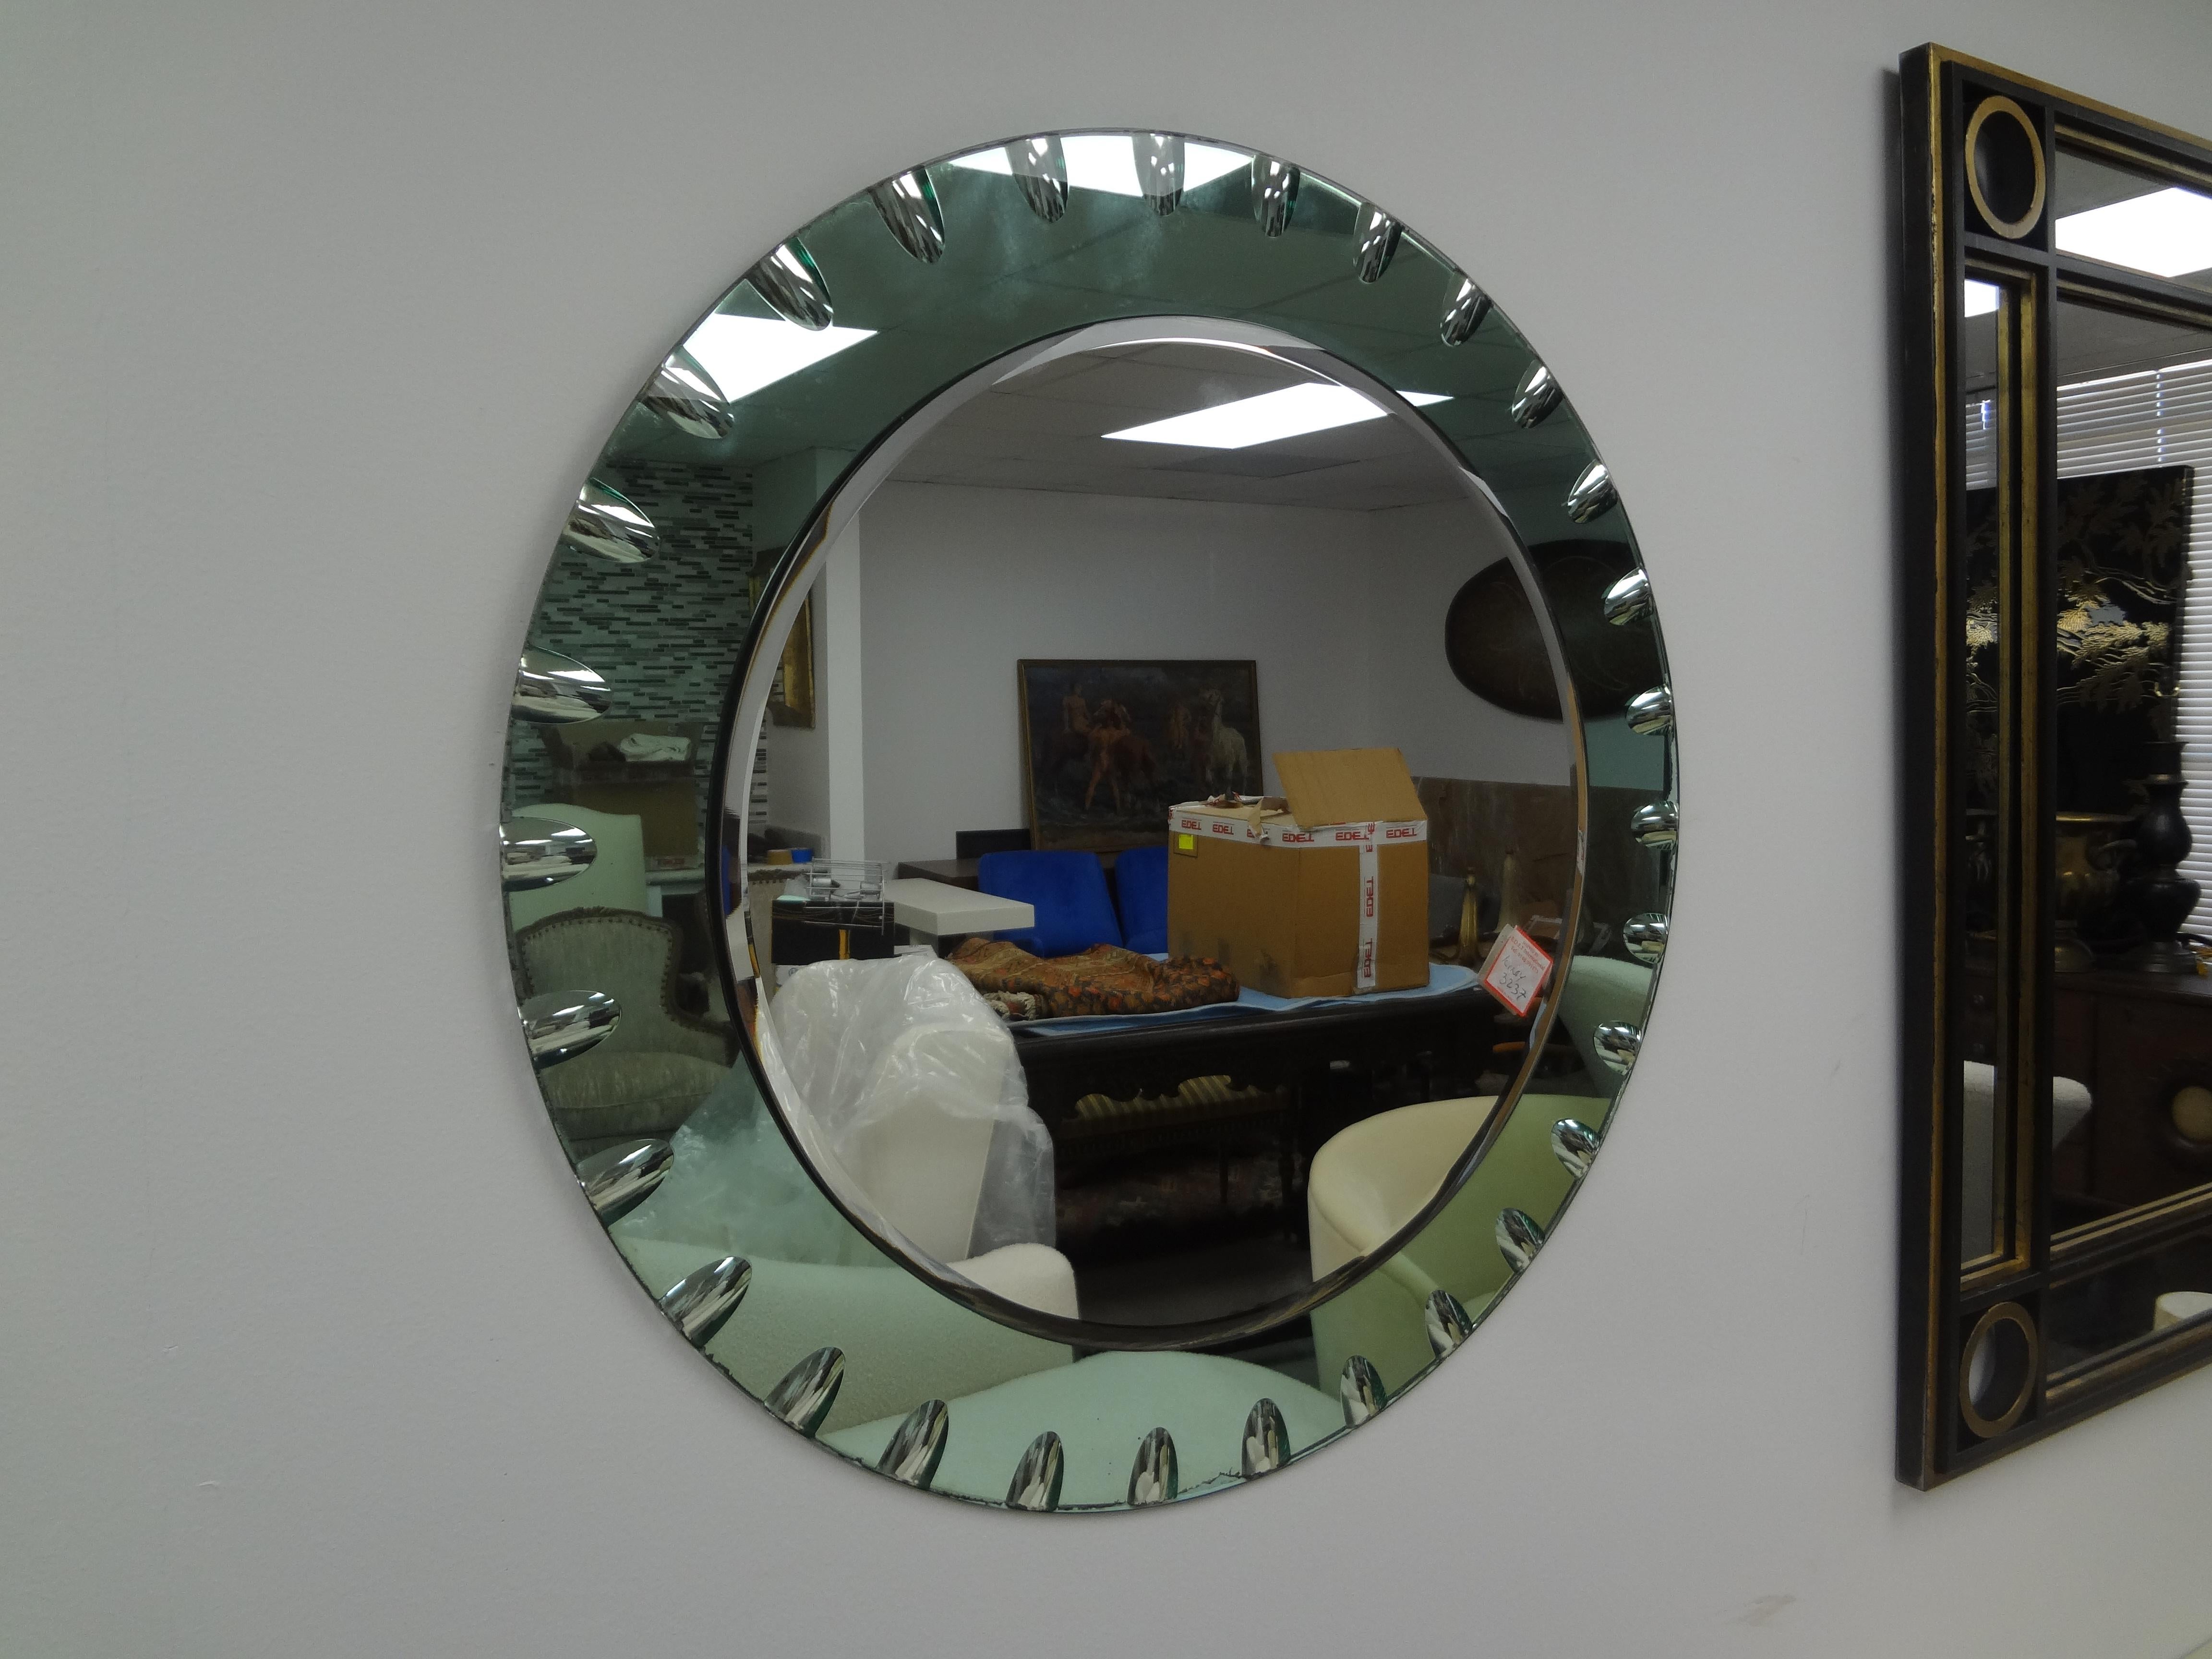 Italian Modern Green Beveled Mirror Inspired By Fontana Arte
This lovely Fontana Arte style mirror has a decorative indented design around the perimeter.
Most unusual!